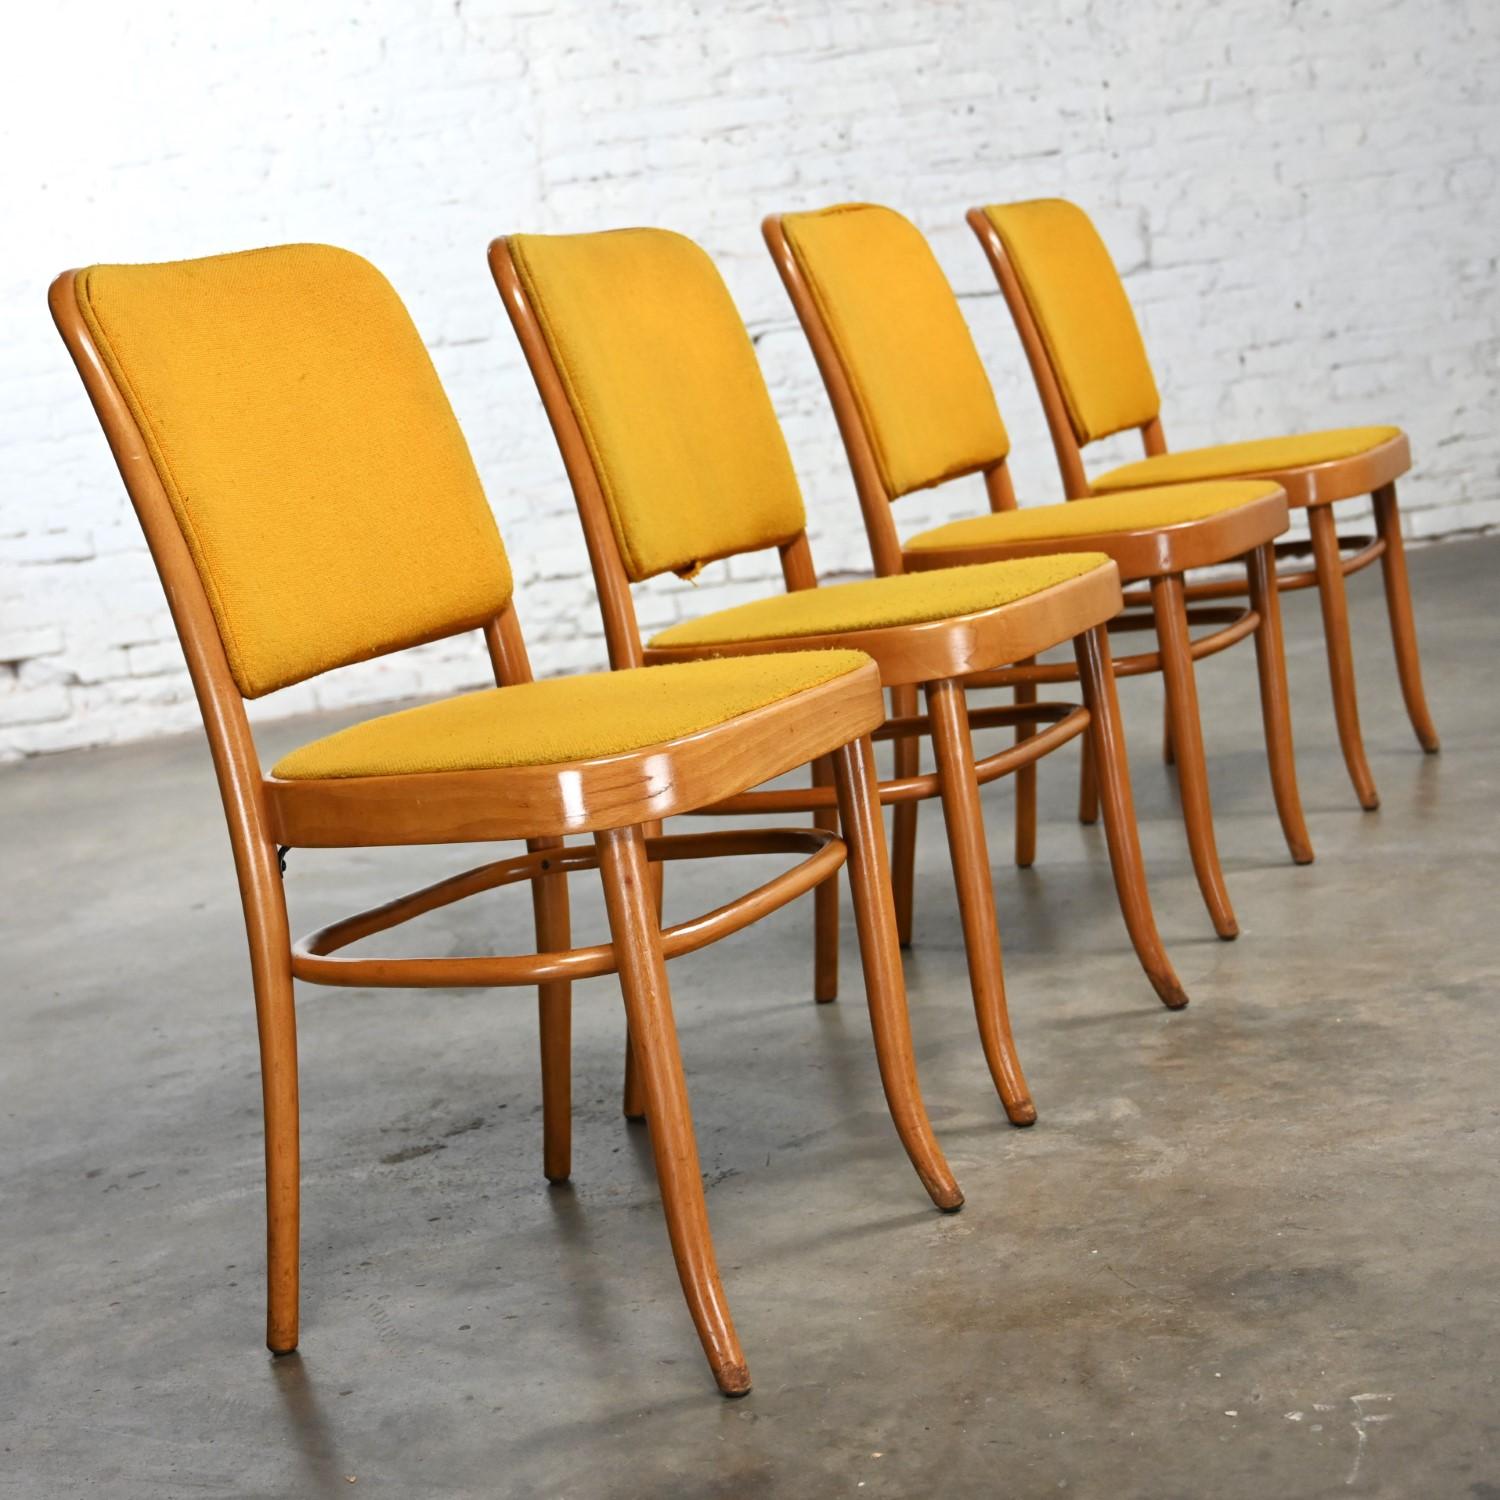 Wonderful vintage Bauhaus beech bentwood frame Thonet Josef Hoffman Prague 811 style armless side dining chairs by Falcon Products Inc., set of 4. Beautiful condition, keeping in mind that these are vintage and not new so will have signs of use and